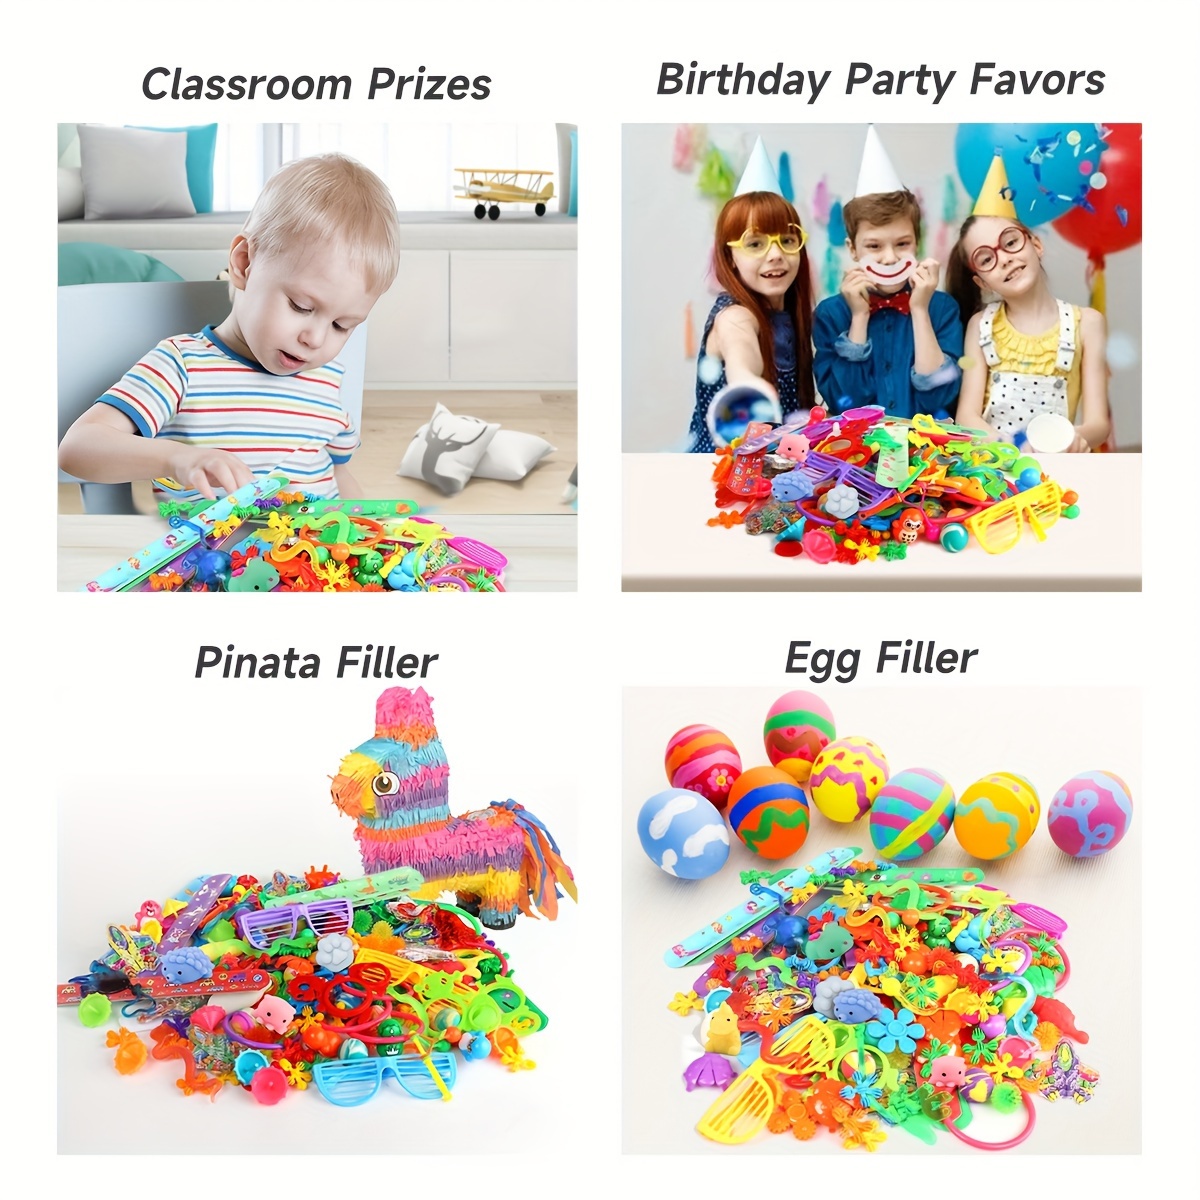 120 Pcs Party Favors for Kids, Treasure Box Toys for Classroom, Goodie Bag  Stuffers, Pinata Filler, Treasure Cheast for Kids Prizes, Carnival Prizes